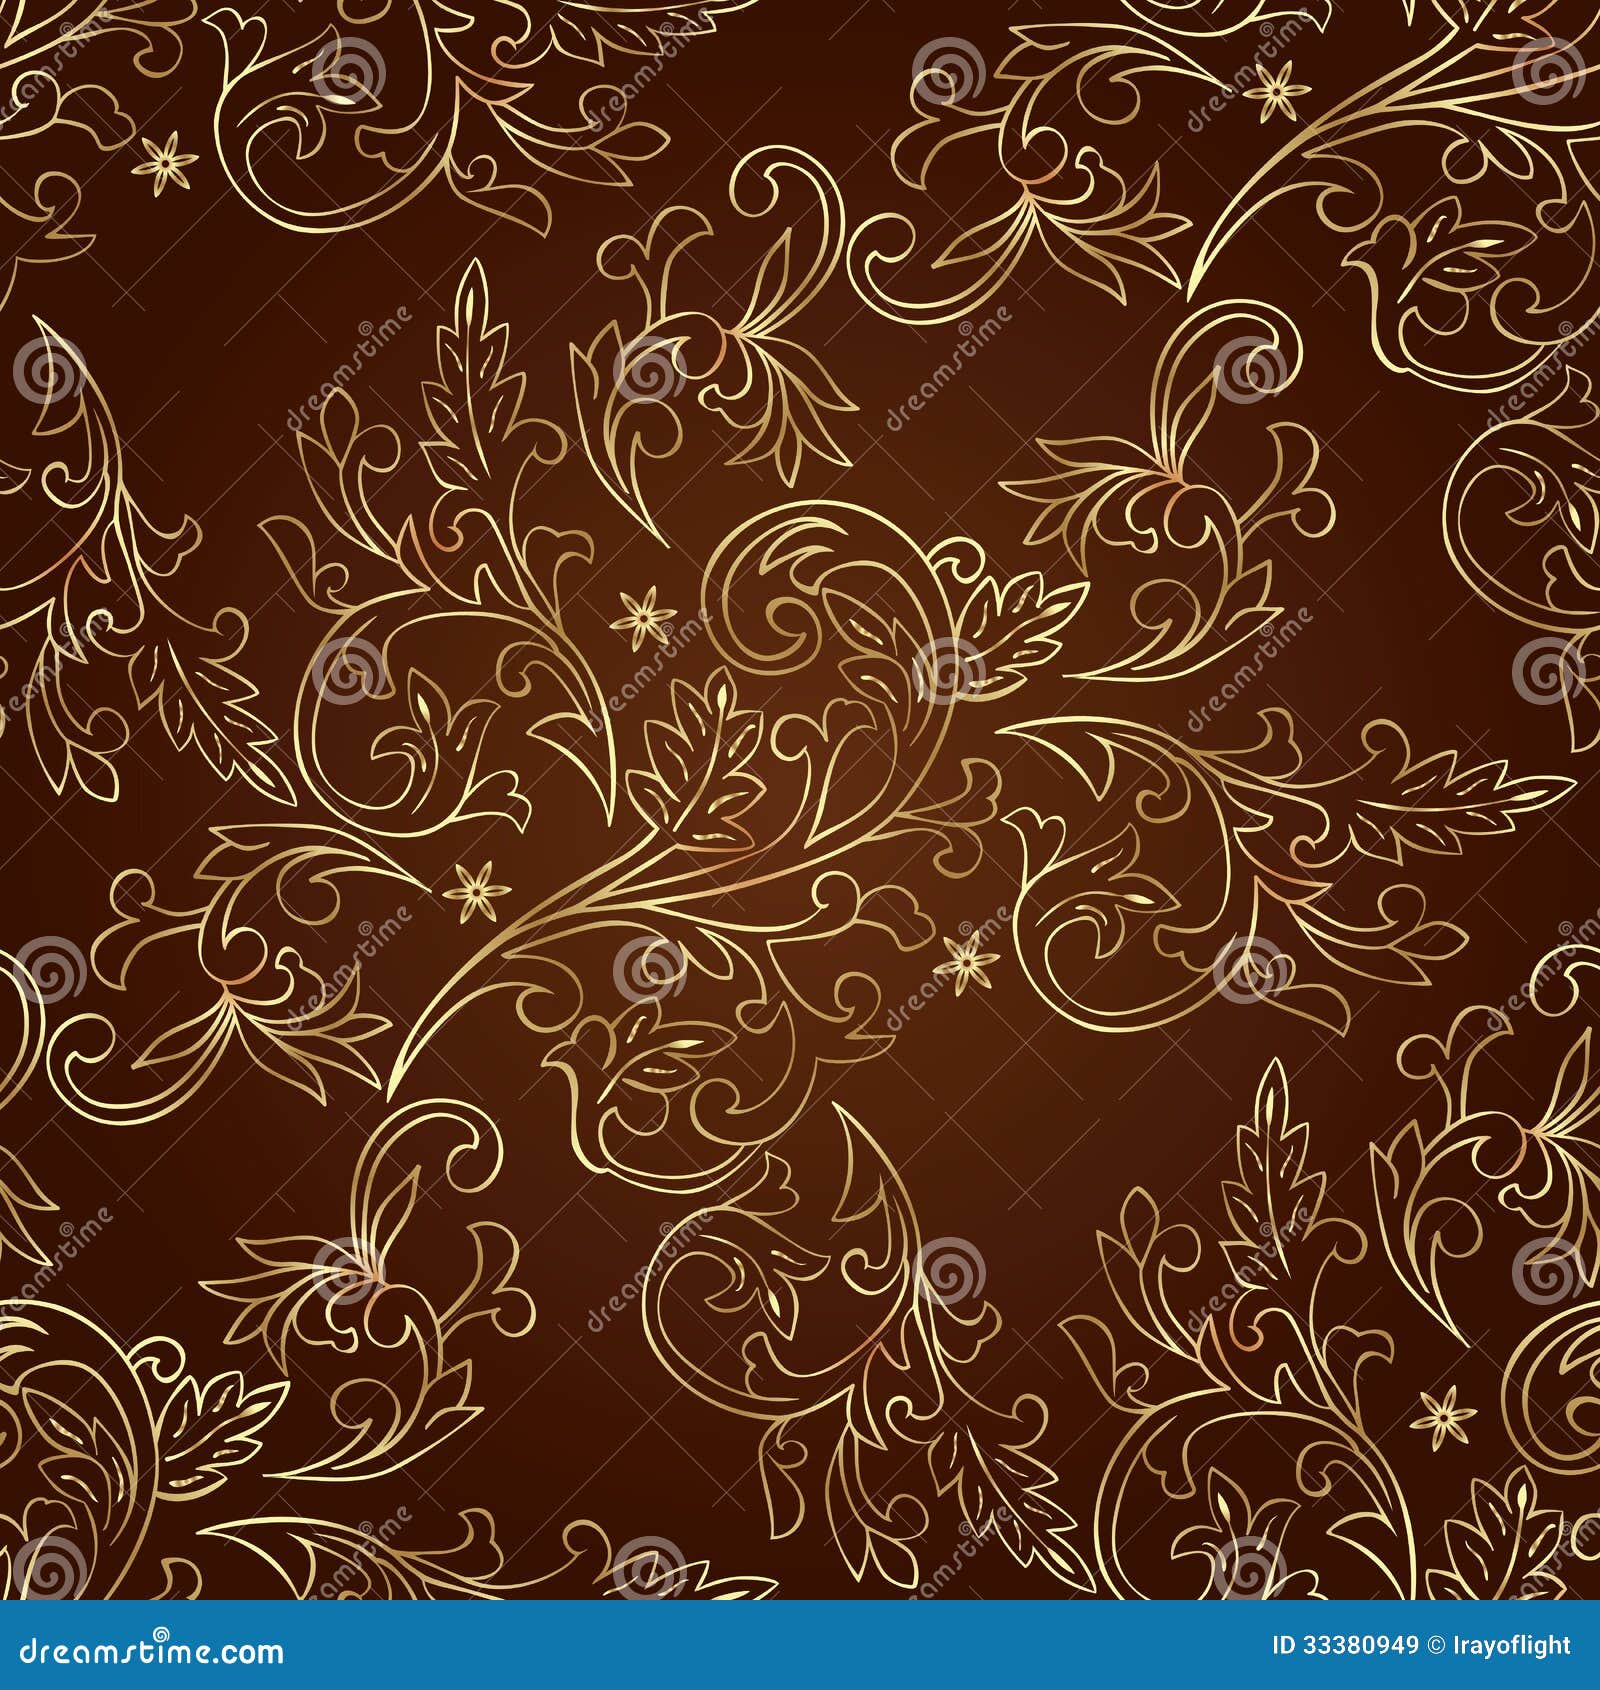 Floral Vintage Seamless Pattern On Brown Background Stock ...